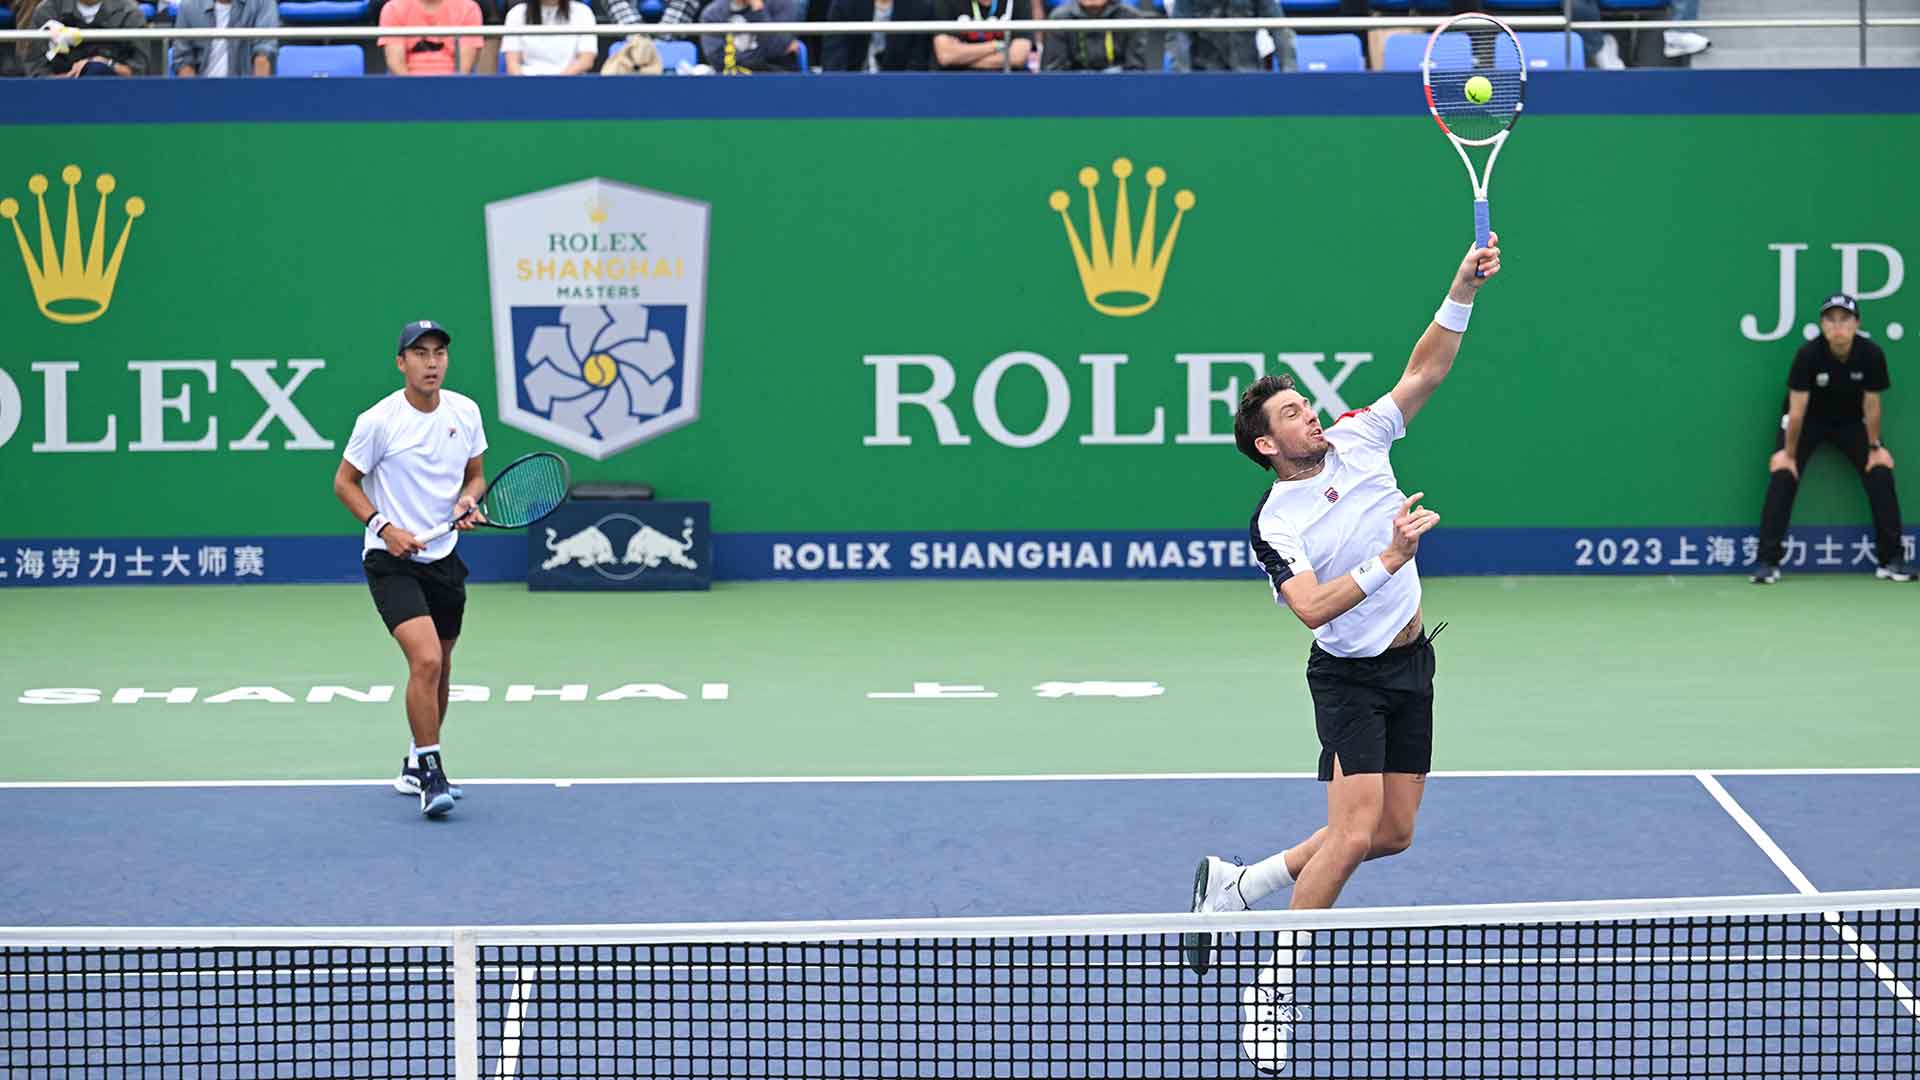 Rinky Hijikata and Cameron Norrie in action on Tuesday in Shanghai.